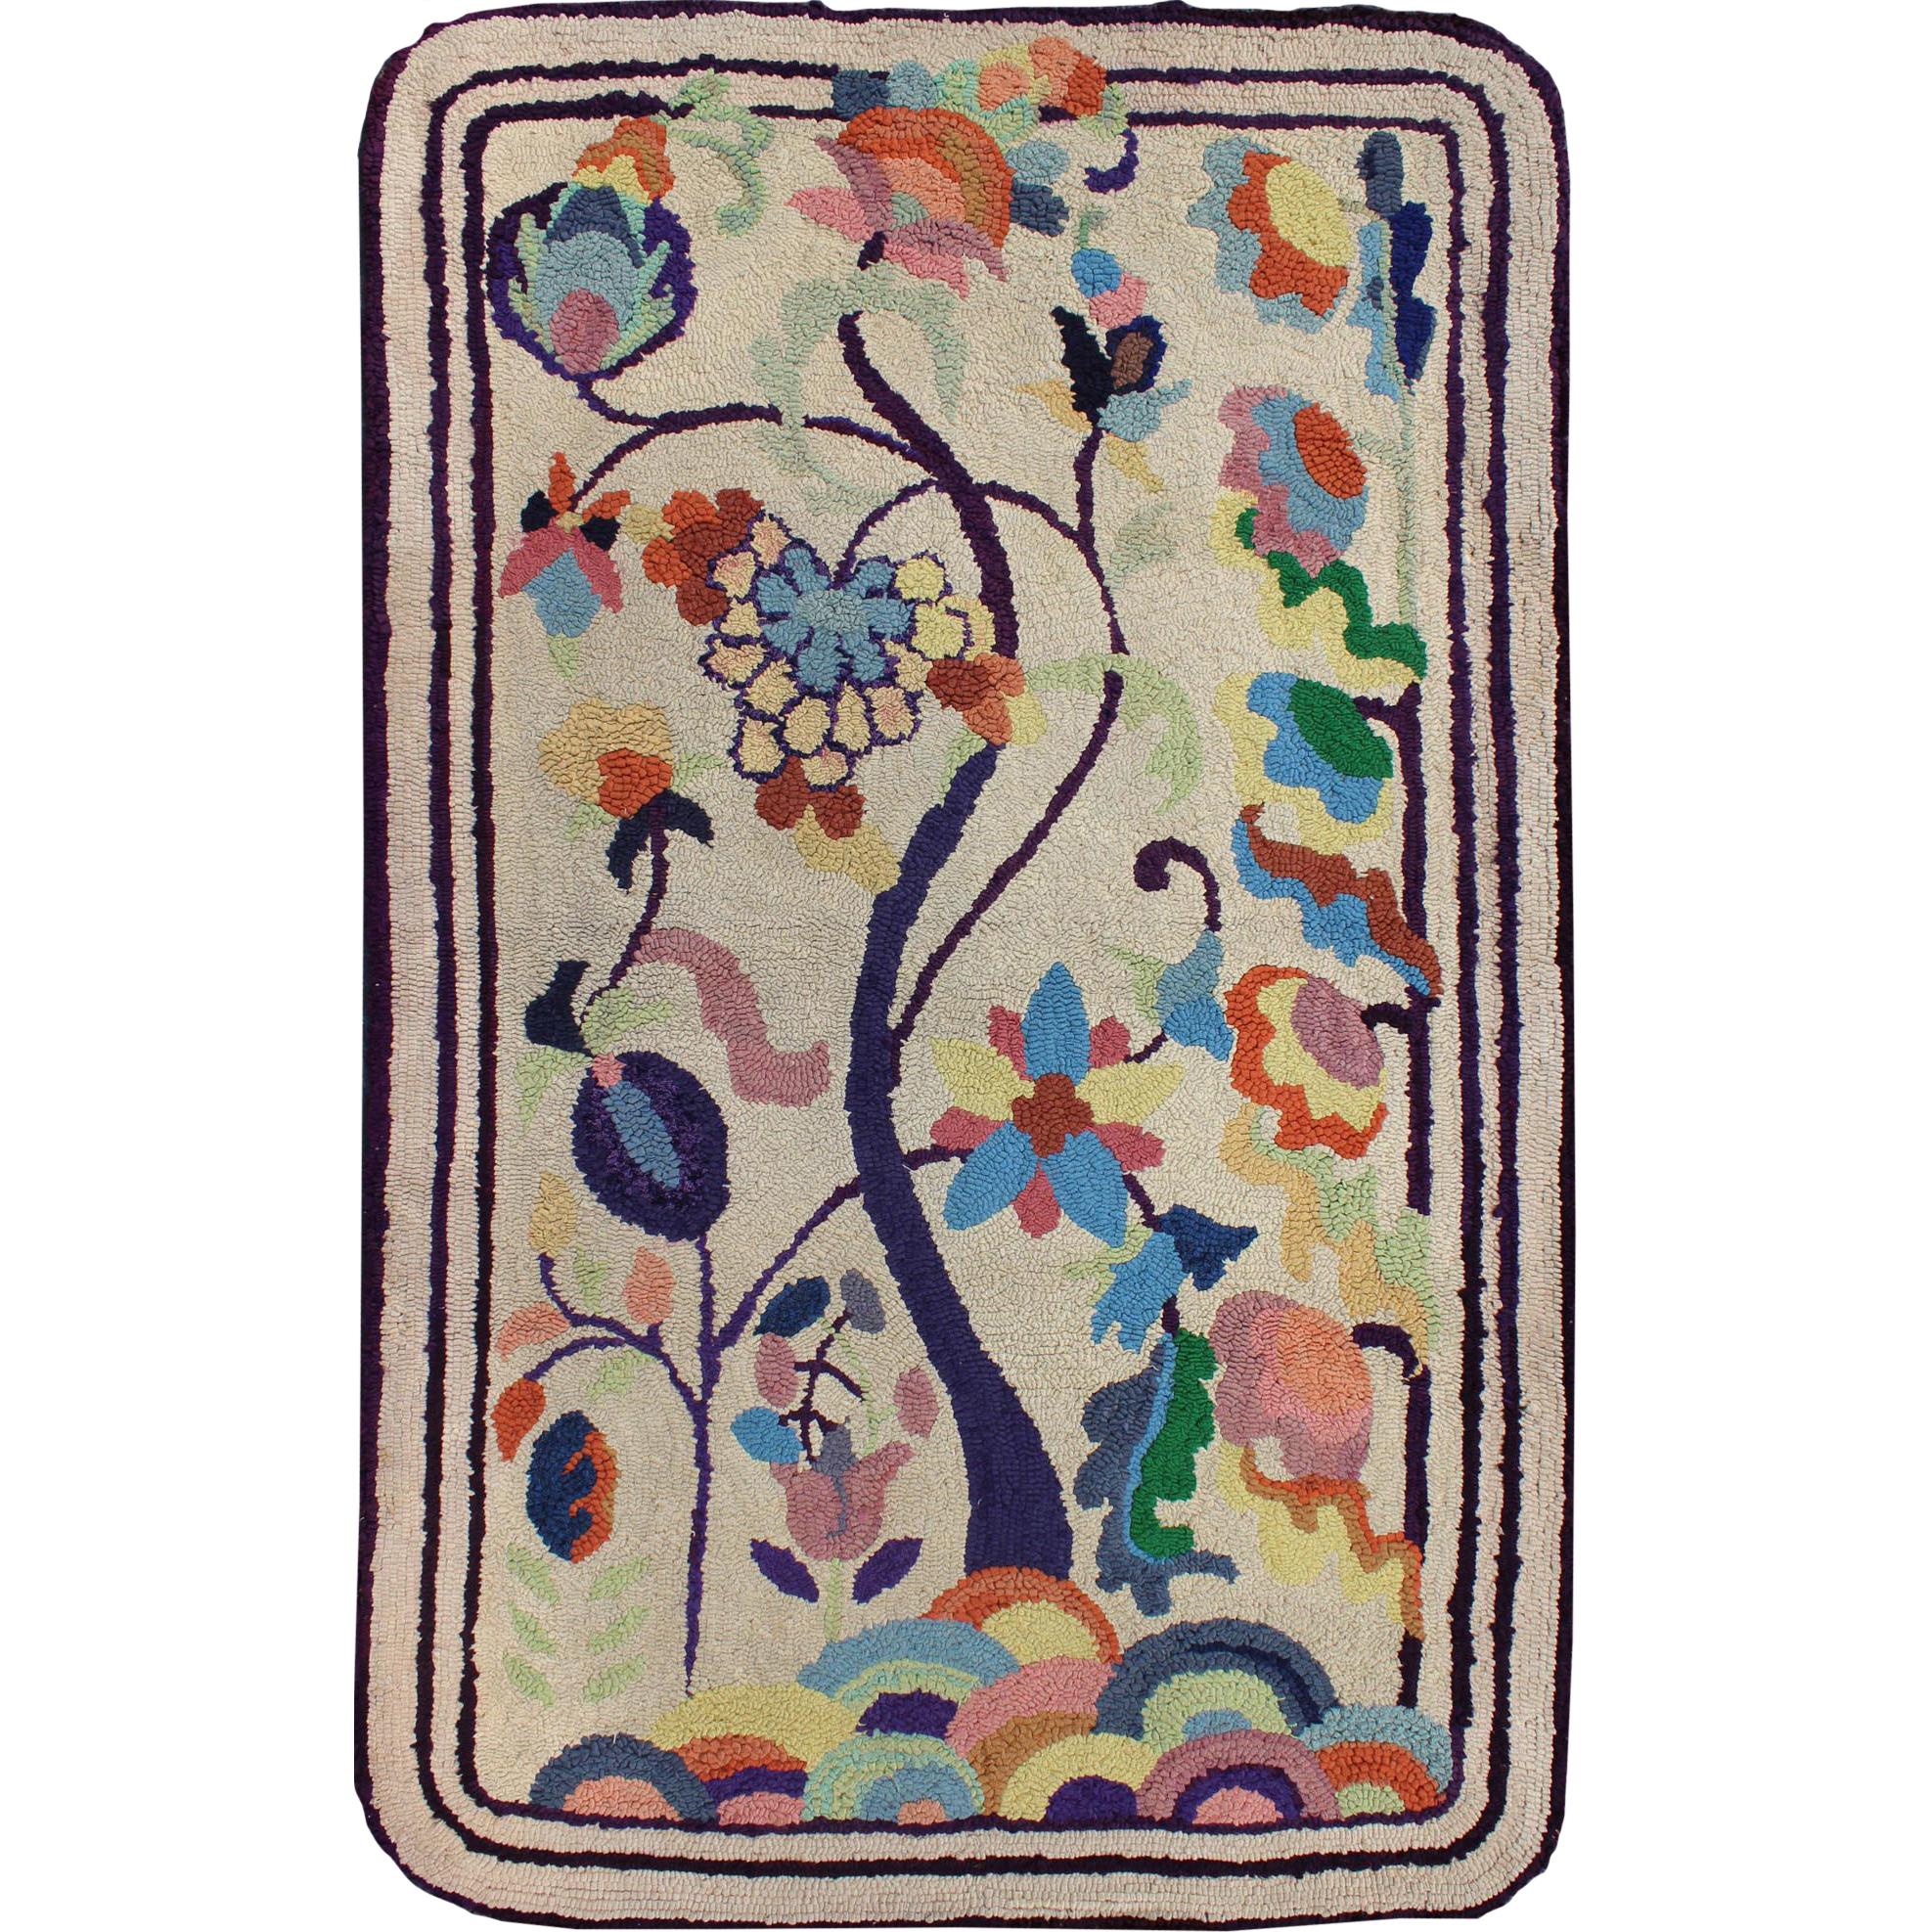 Colorful Vintage American Hooked Rug with Branching Rainbow-Colored Flowers